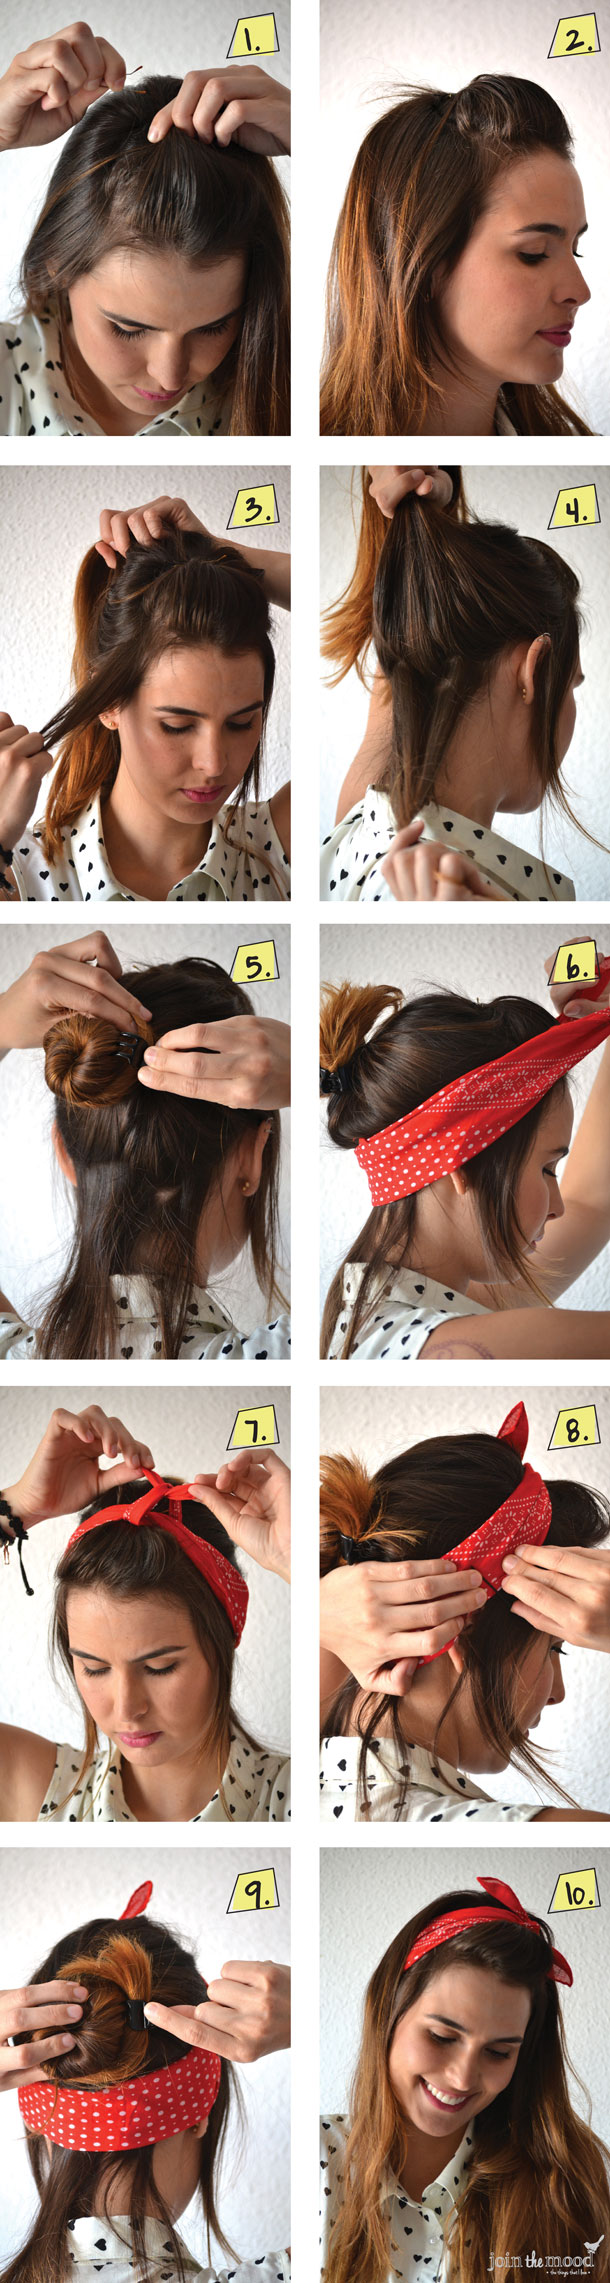 Hair with a red headscarf